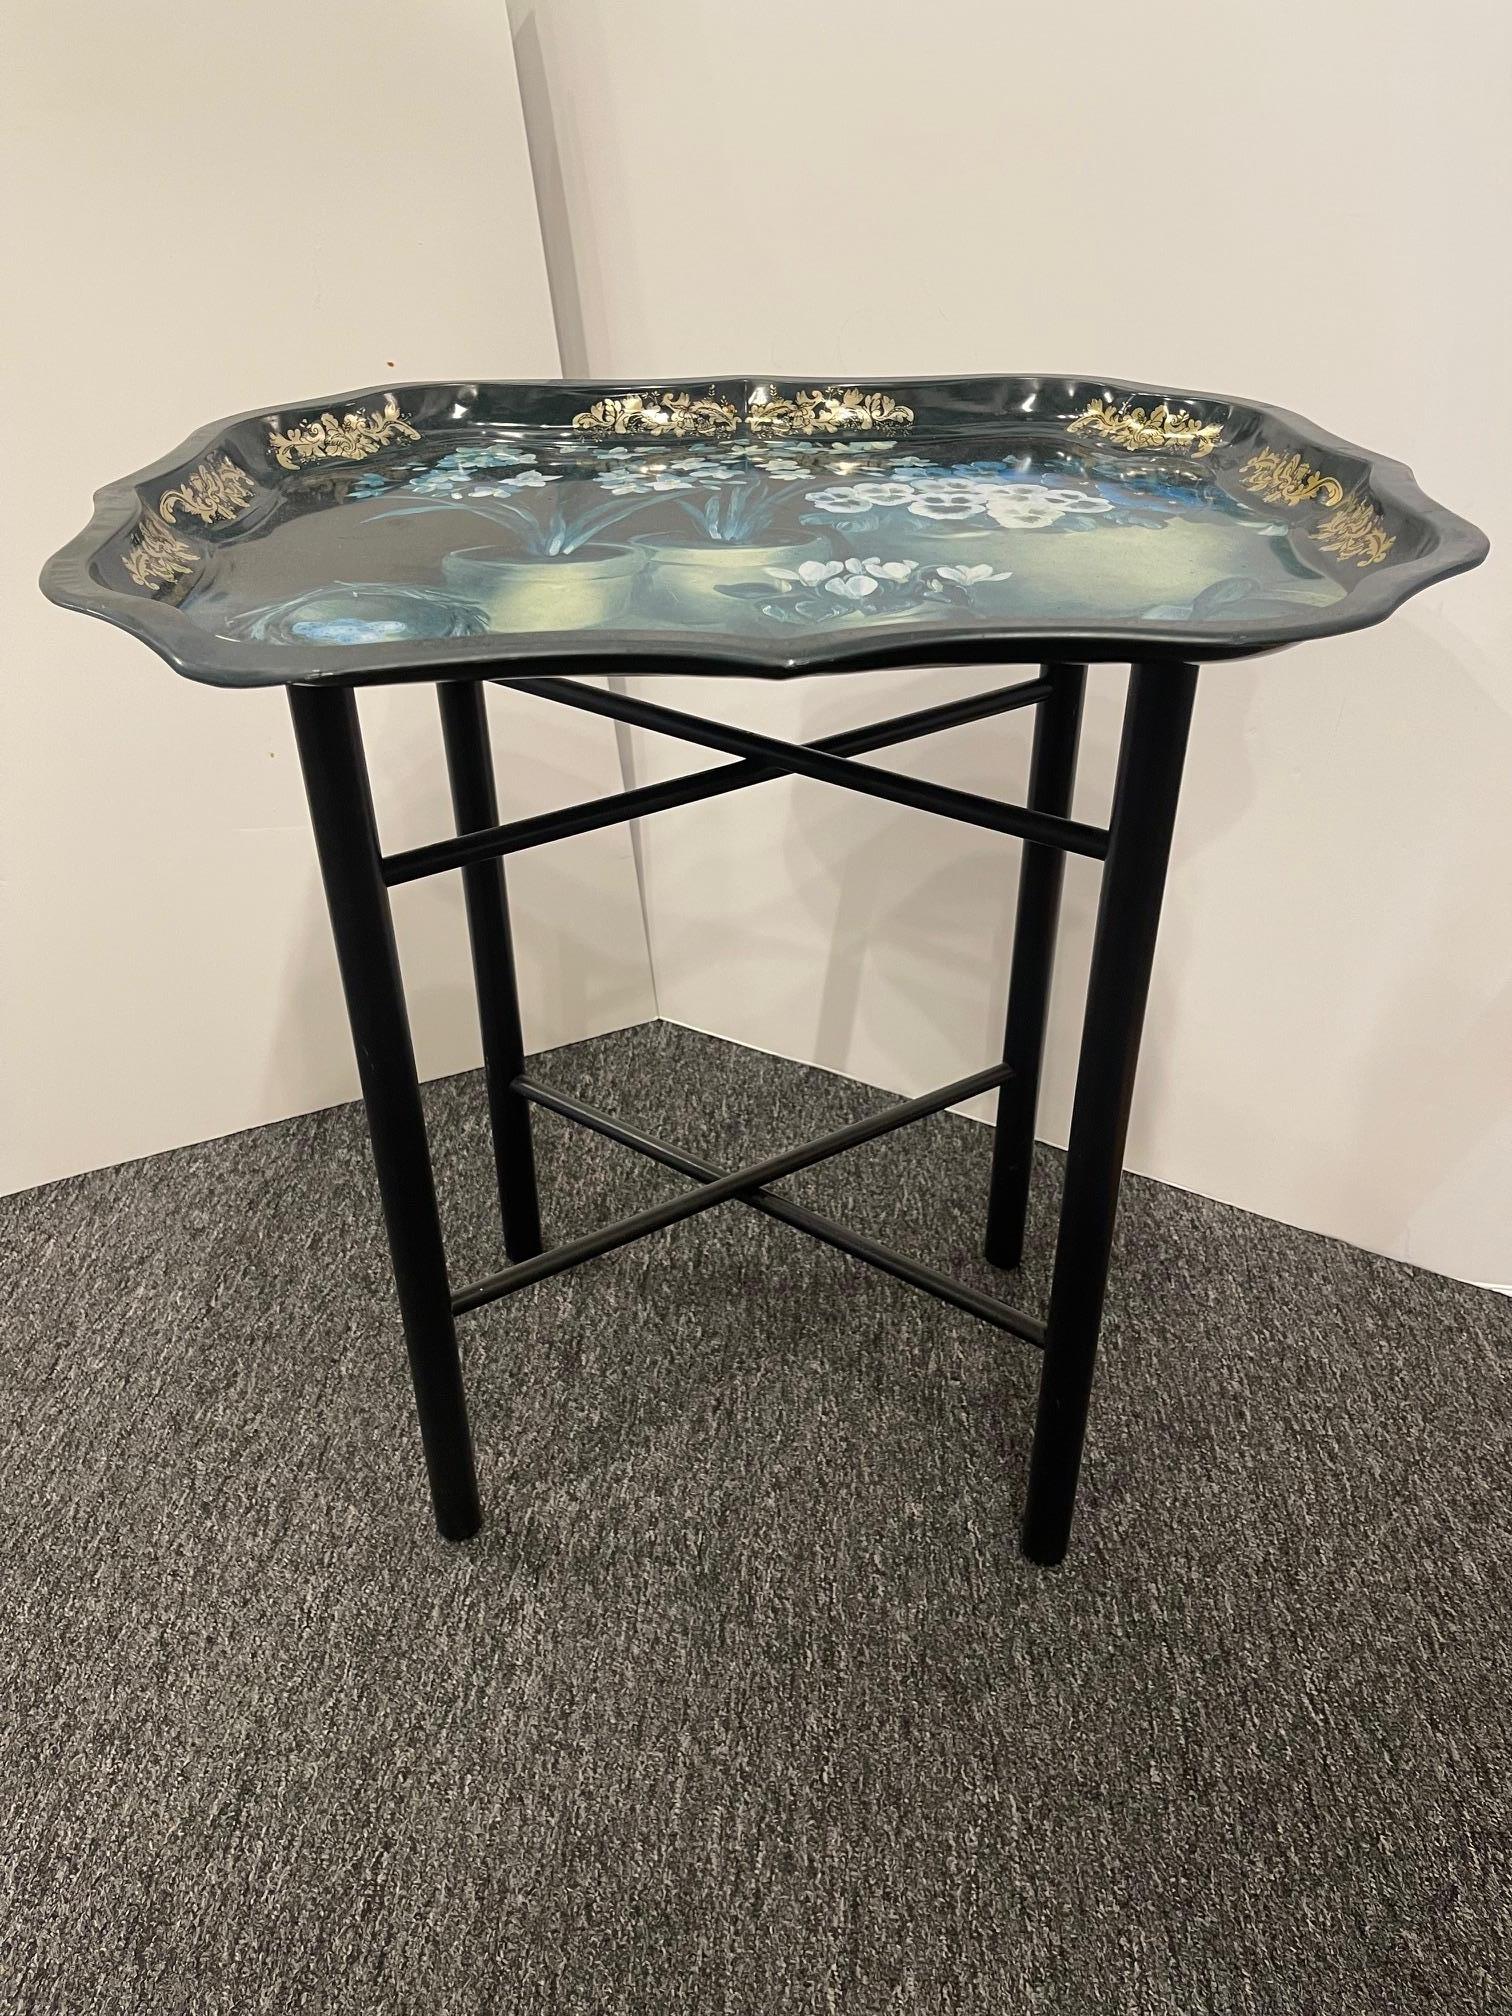 Metal English Tole Tray Table with Floral Design, 20th Century For Sale